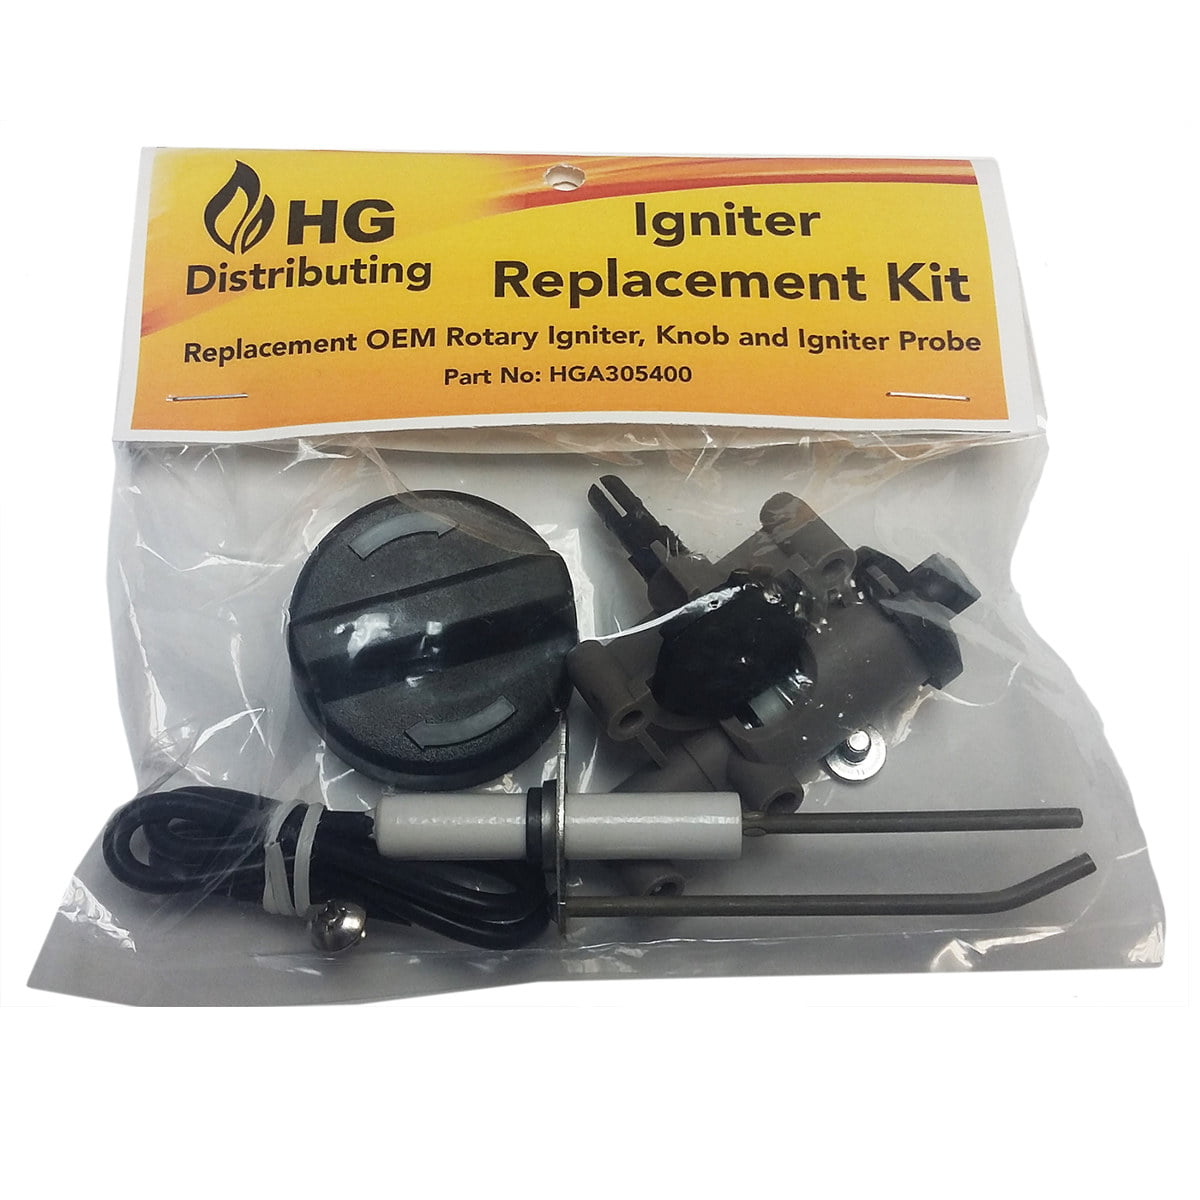 Holland Grill Igniter Replacement Kit 